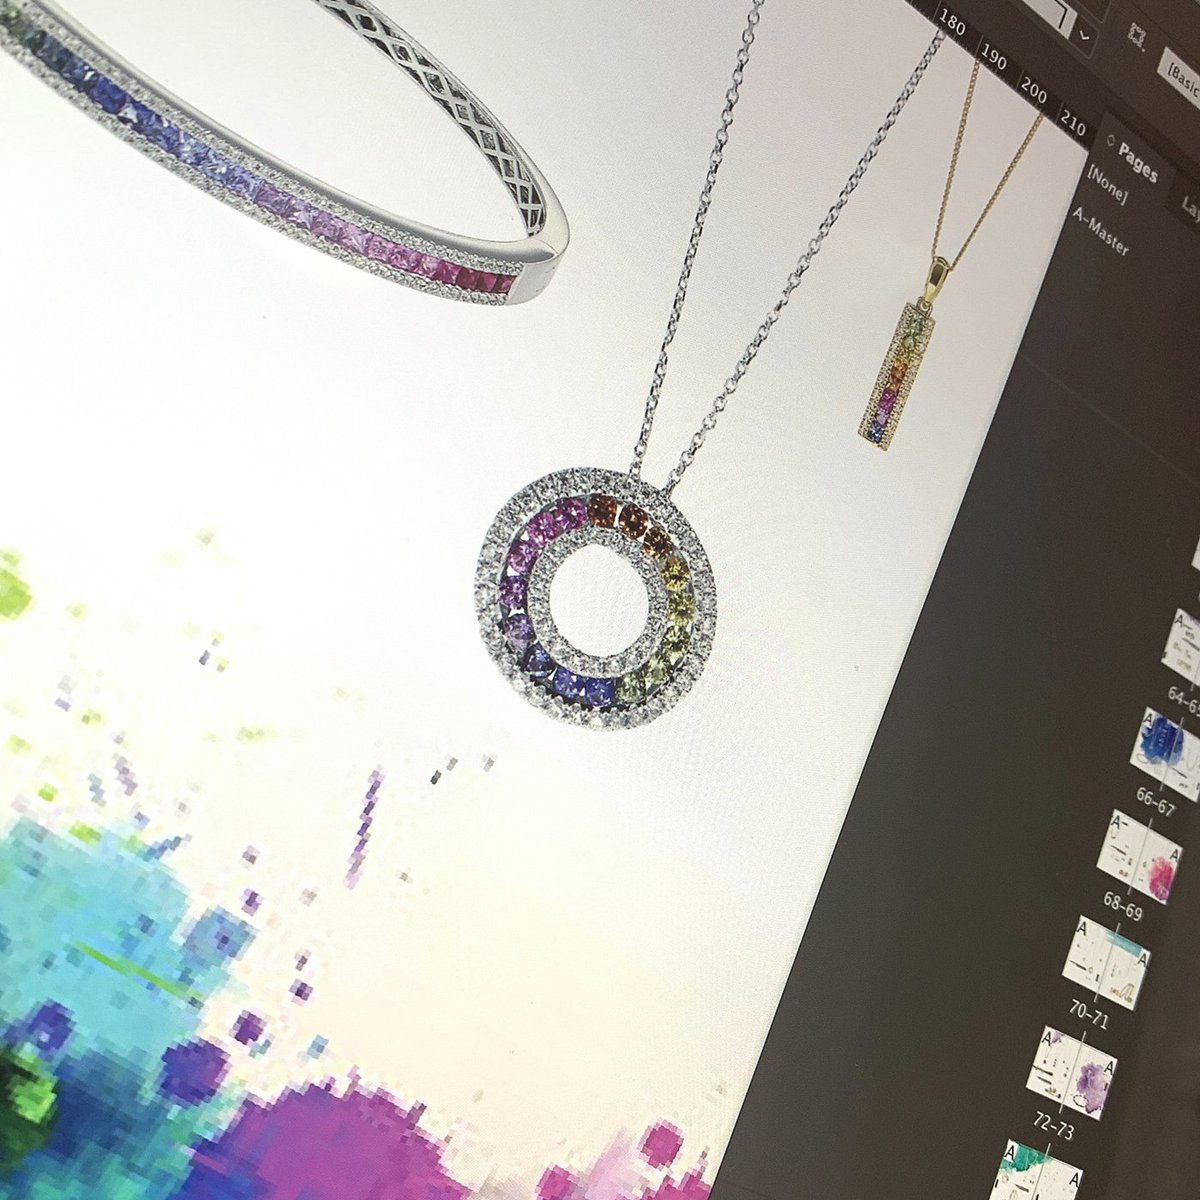 We are literally adding a splash of colour to our latest design work currently in progress in the studio...

#GraphicDesign #MagazineDesign #Design #Jewellery #ColouredGemstones #Diamonds #Colour